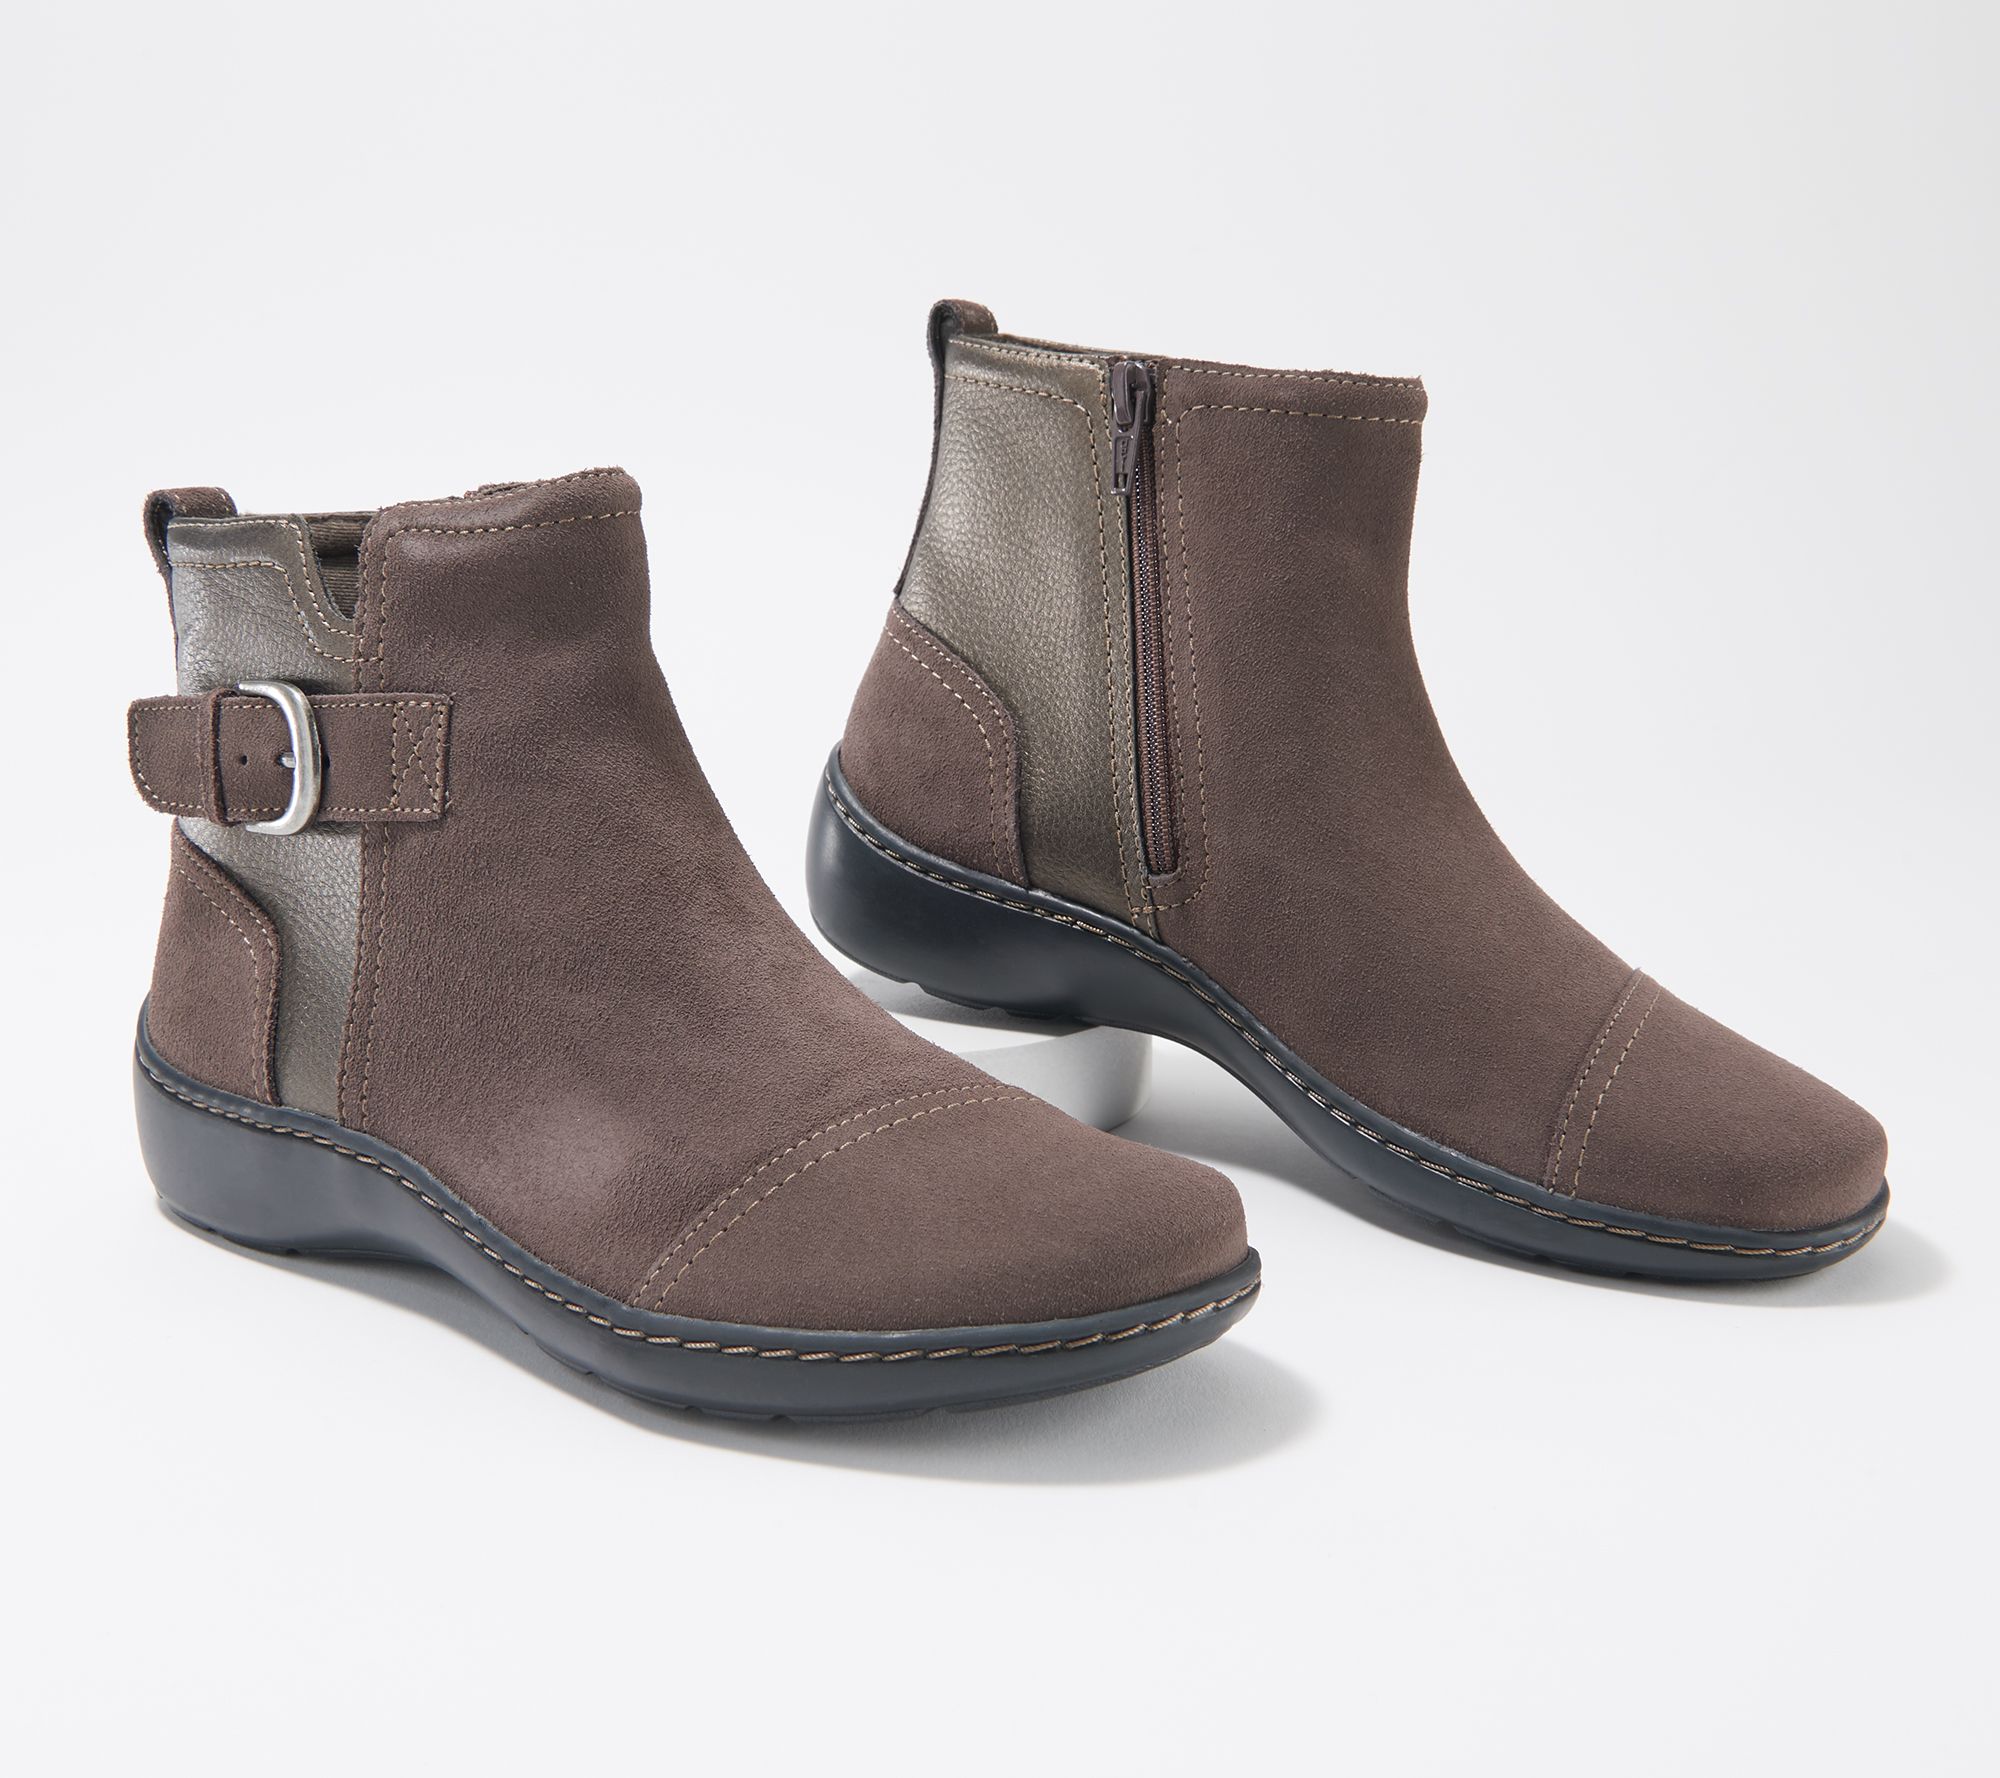 clarks short suede boots